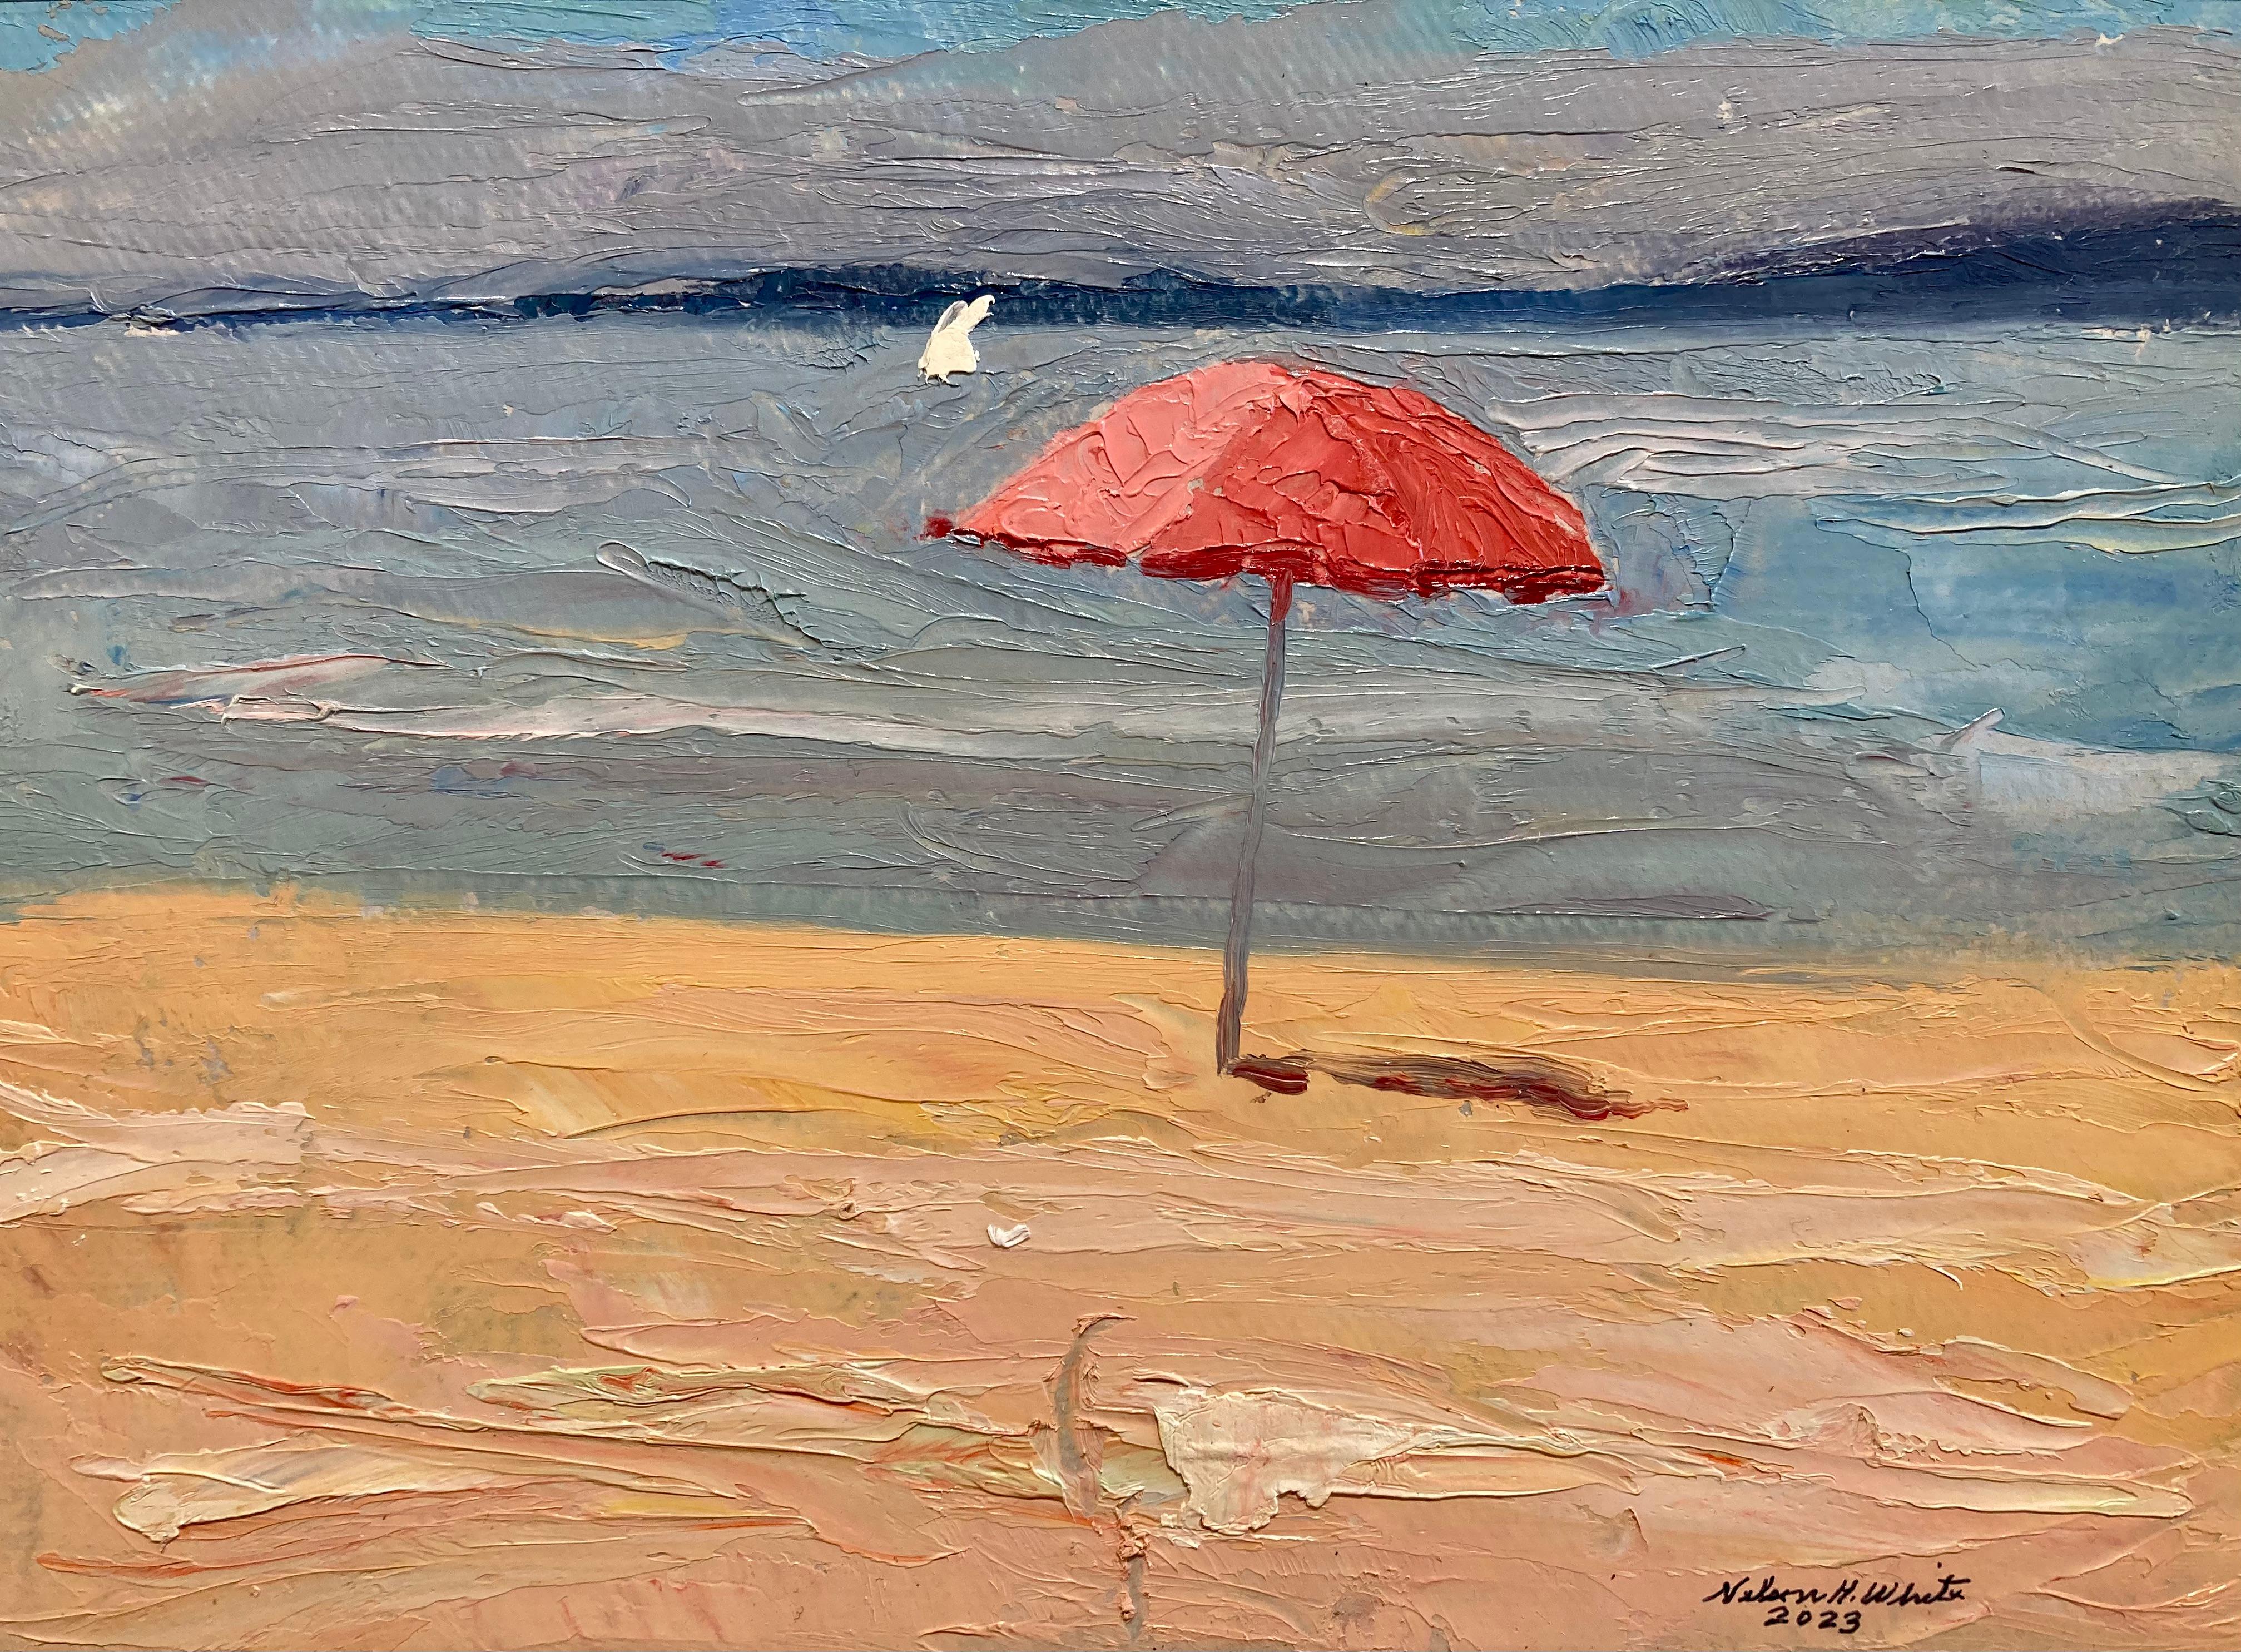 A 2023 painting from the plein air painter, and American Impressionist, Nelson Holbrook White. White depicts one of his iconic red umbrellas on a beach in Long Island, NY.

Framed Dimensions: 13.5 x 17.75 inches

Artist Bio:
Nelson H. White was born